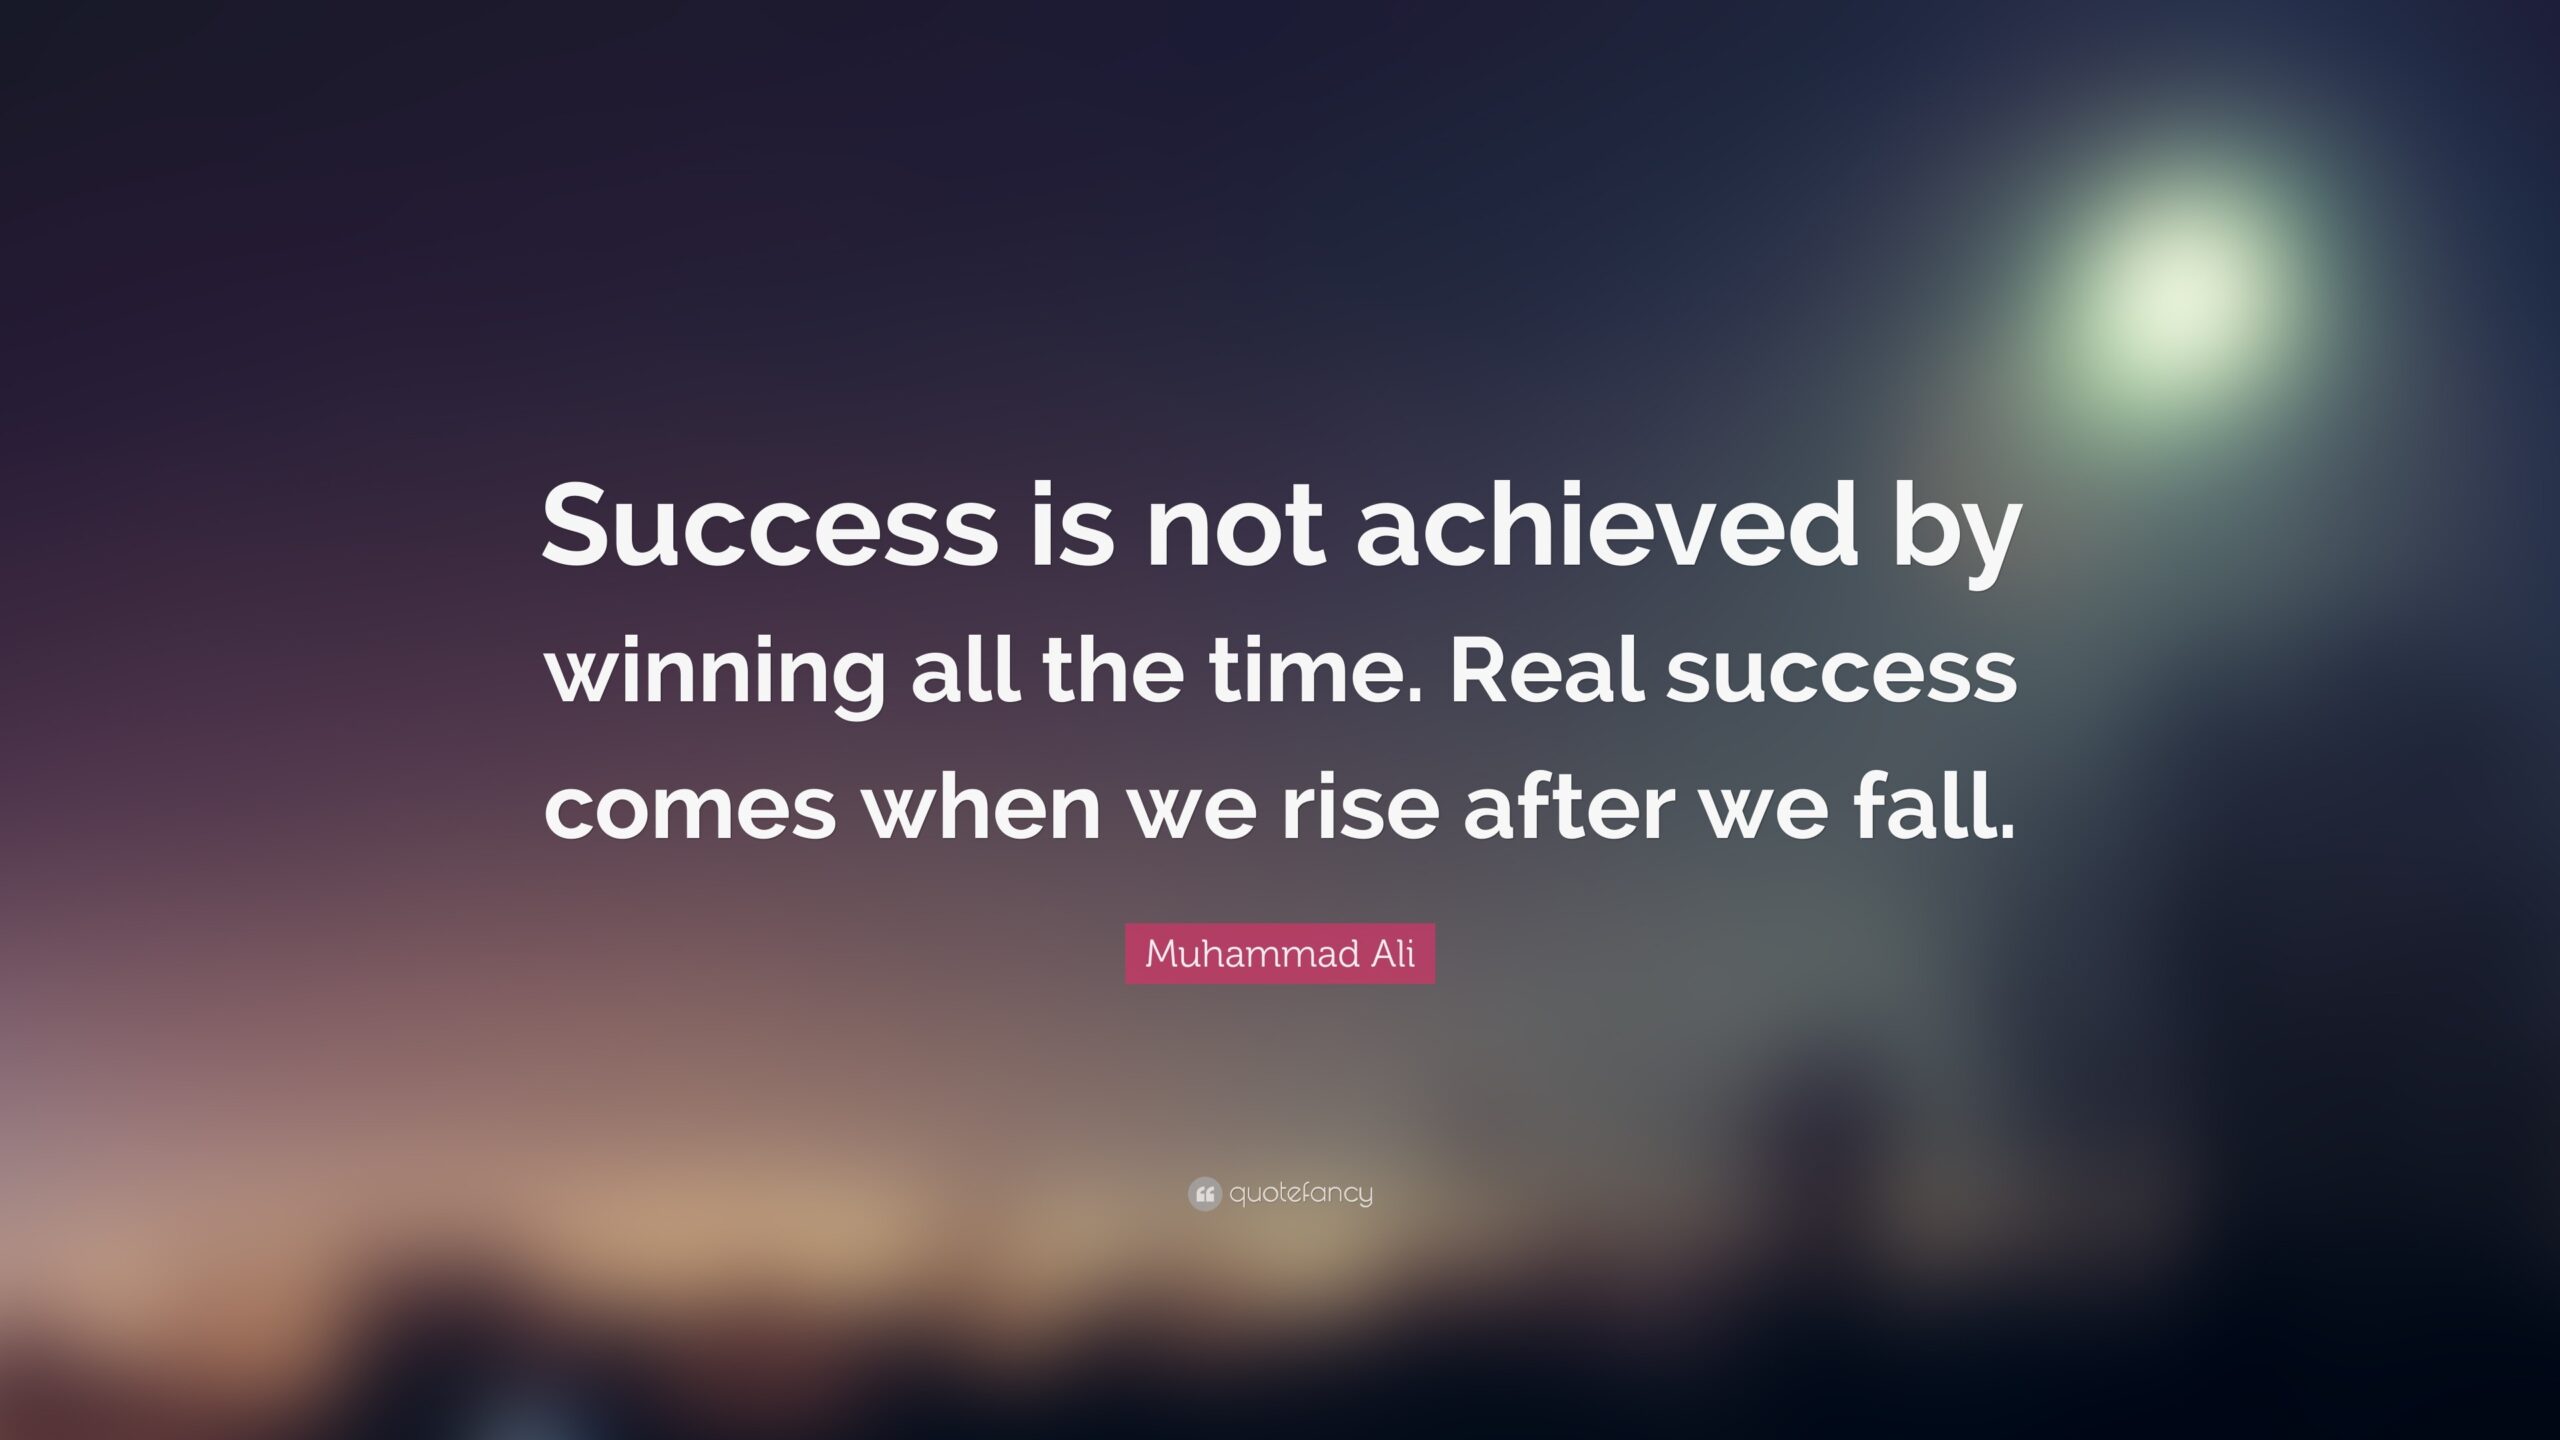 Being Real Is Rare Quotes Success Is Not Achieved By Winning All The Time